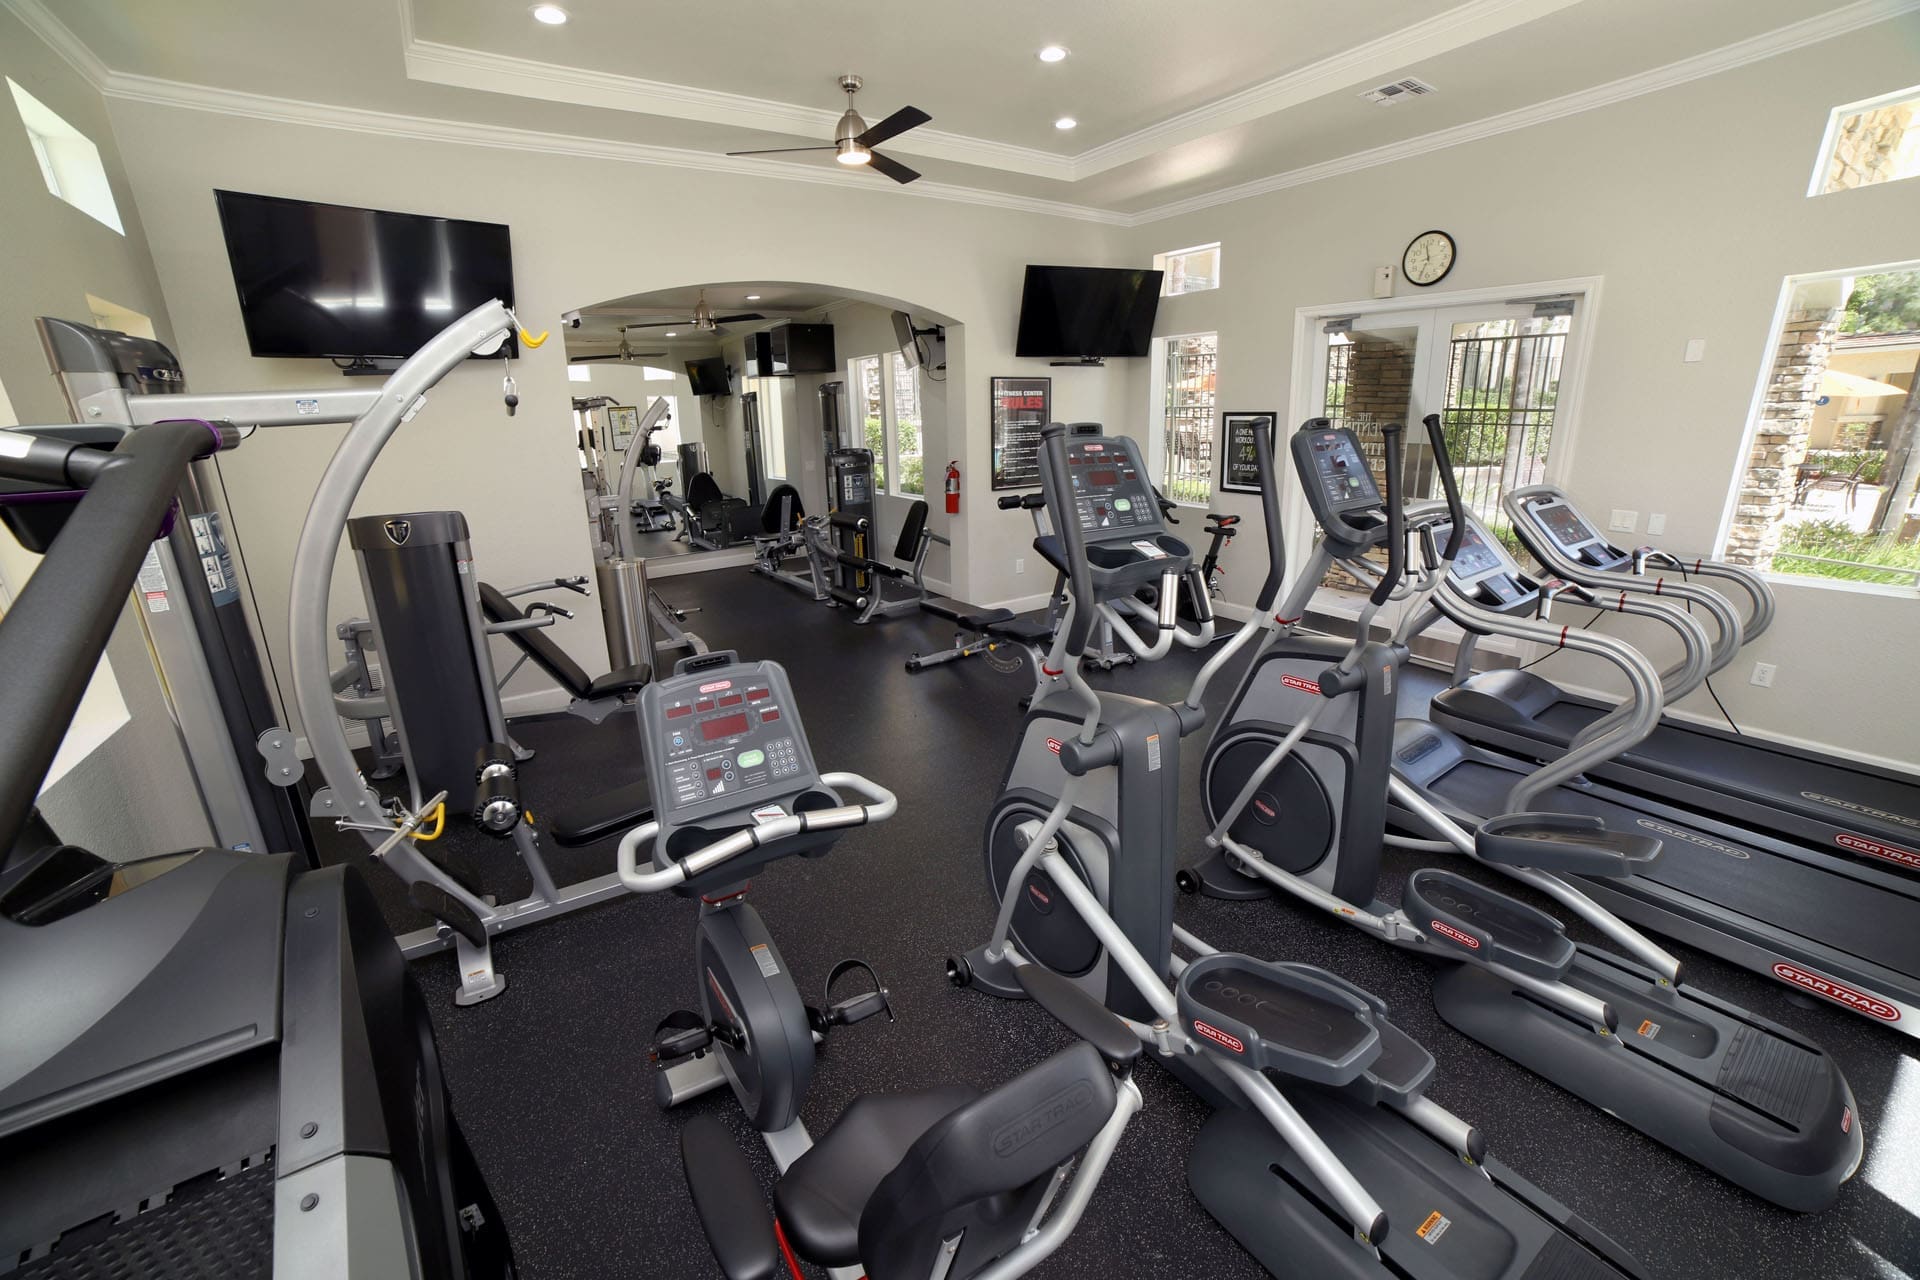 Aliso Viejo CA Apartments-Aventine Apartments Fitness Center with Cardio Machines, Weights, and TVs